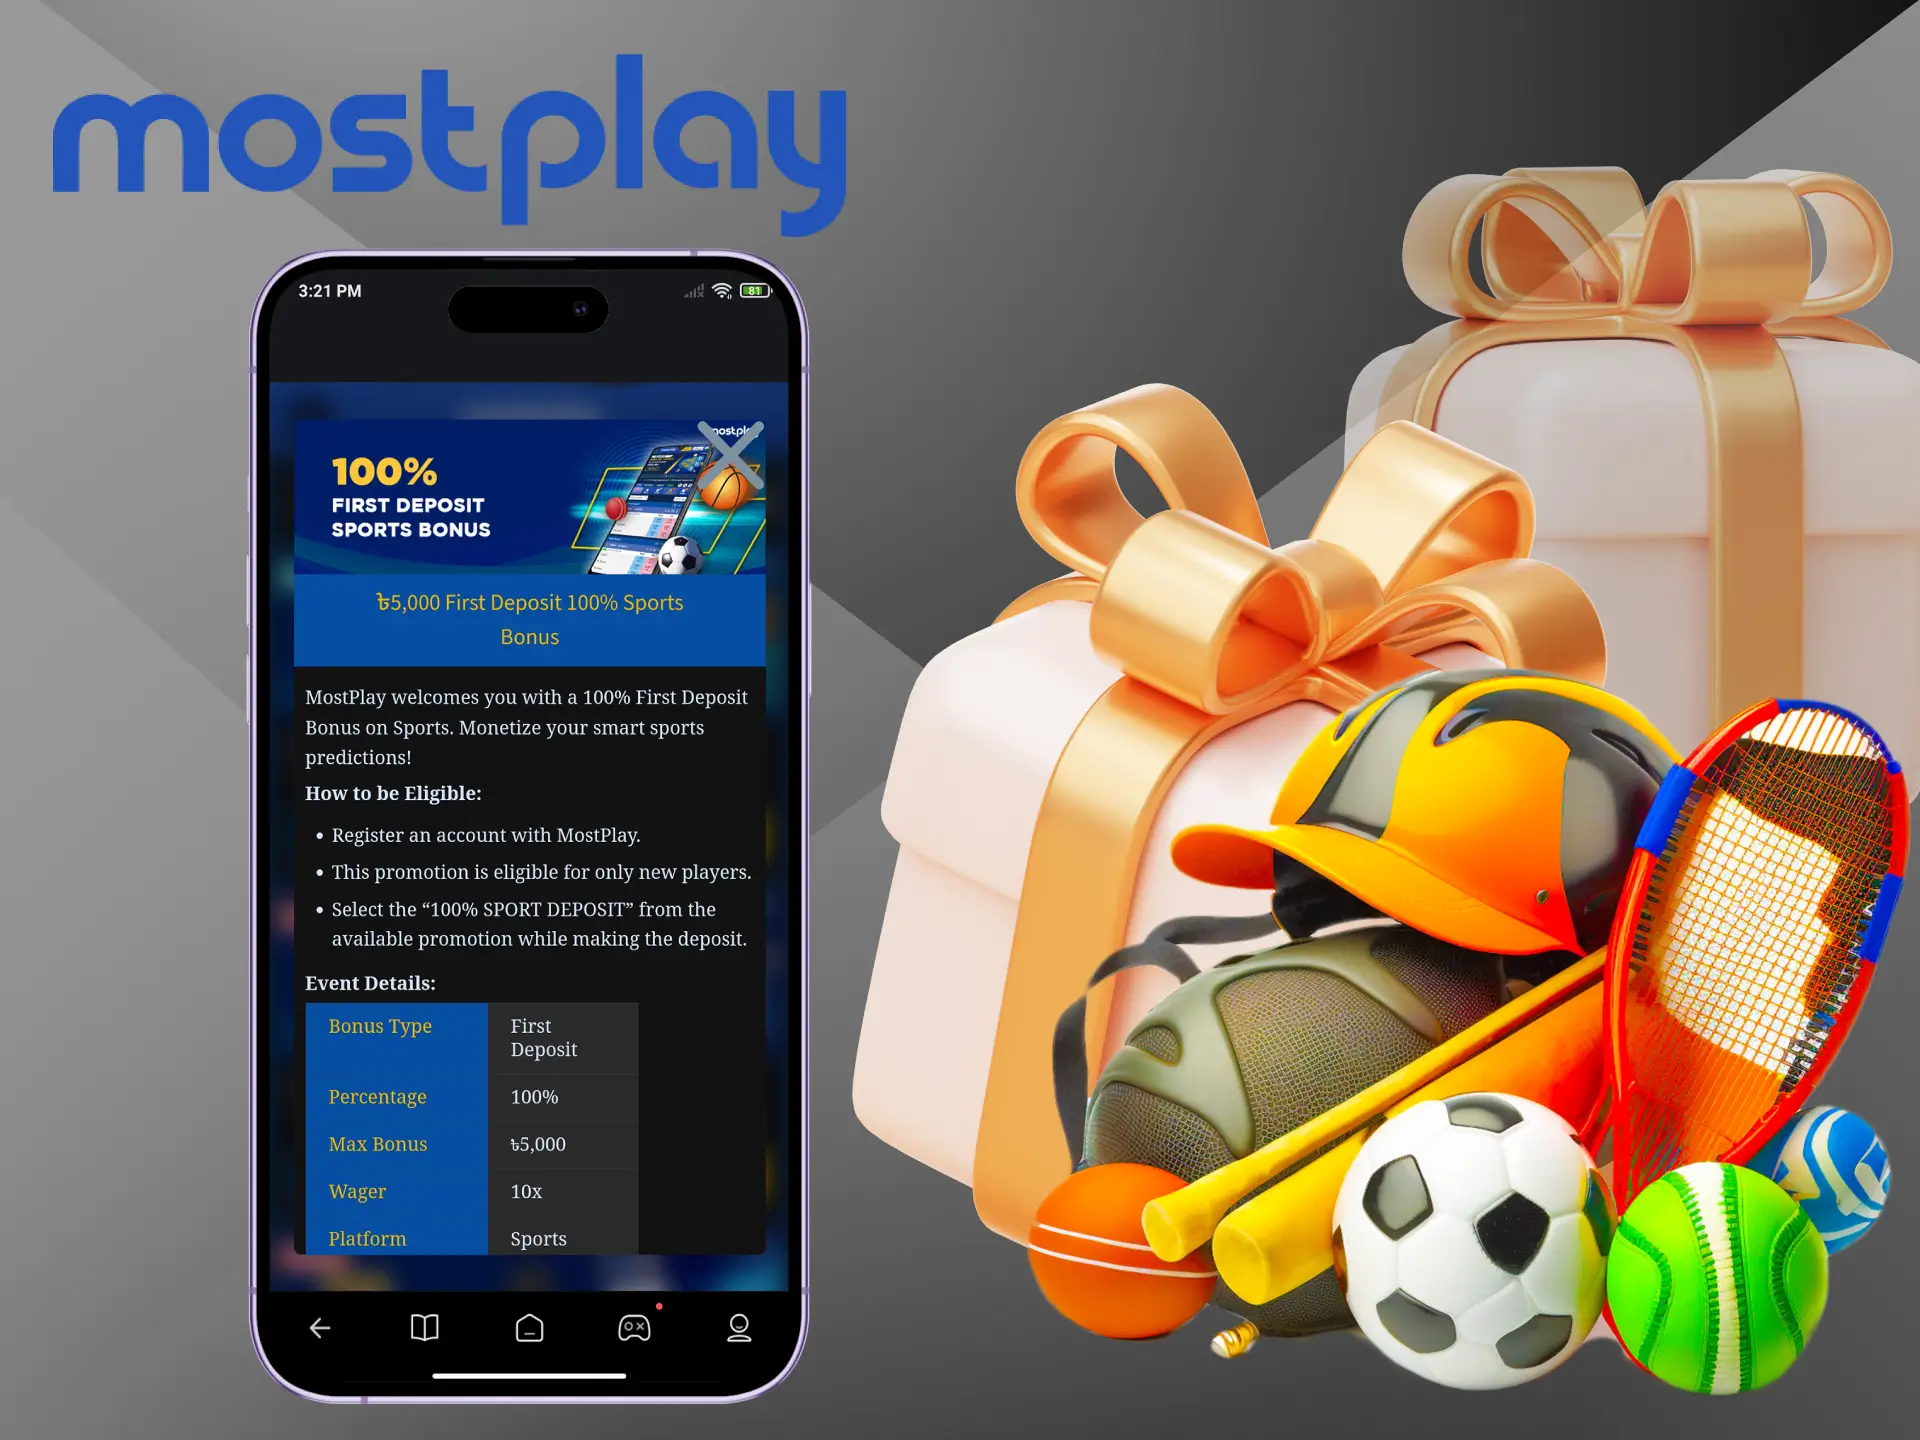 Place bets at Mostplay on your favourites using a large welcome bonus on deposit.